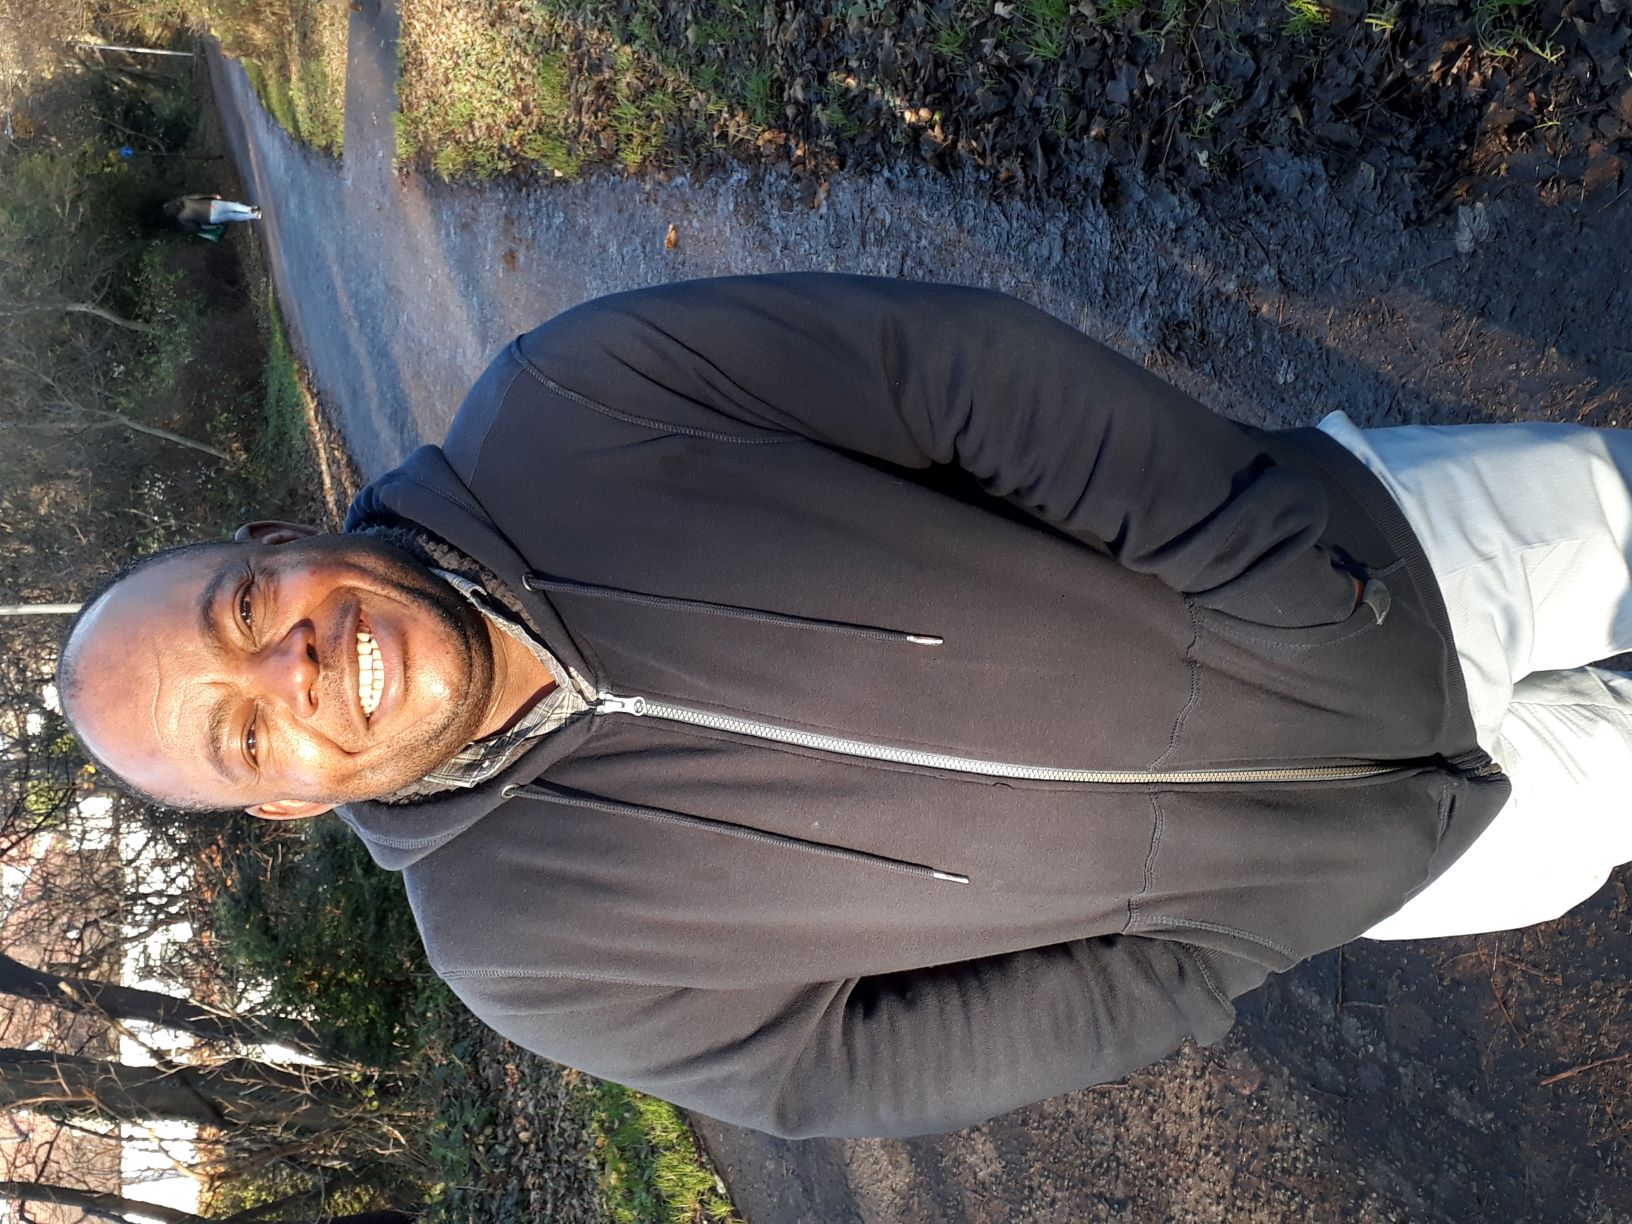 Smile No.90 Martins, originally from Nigeria, now happy, settled and working in Edinburgh